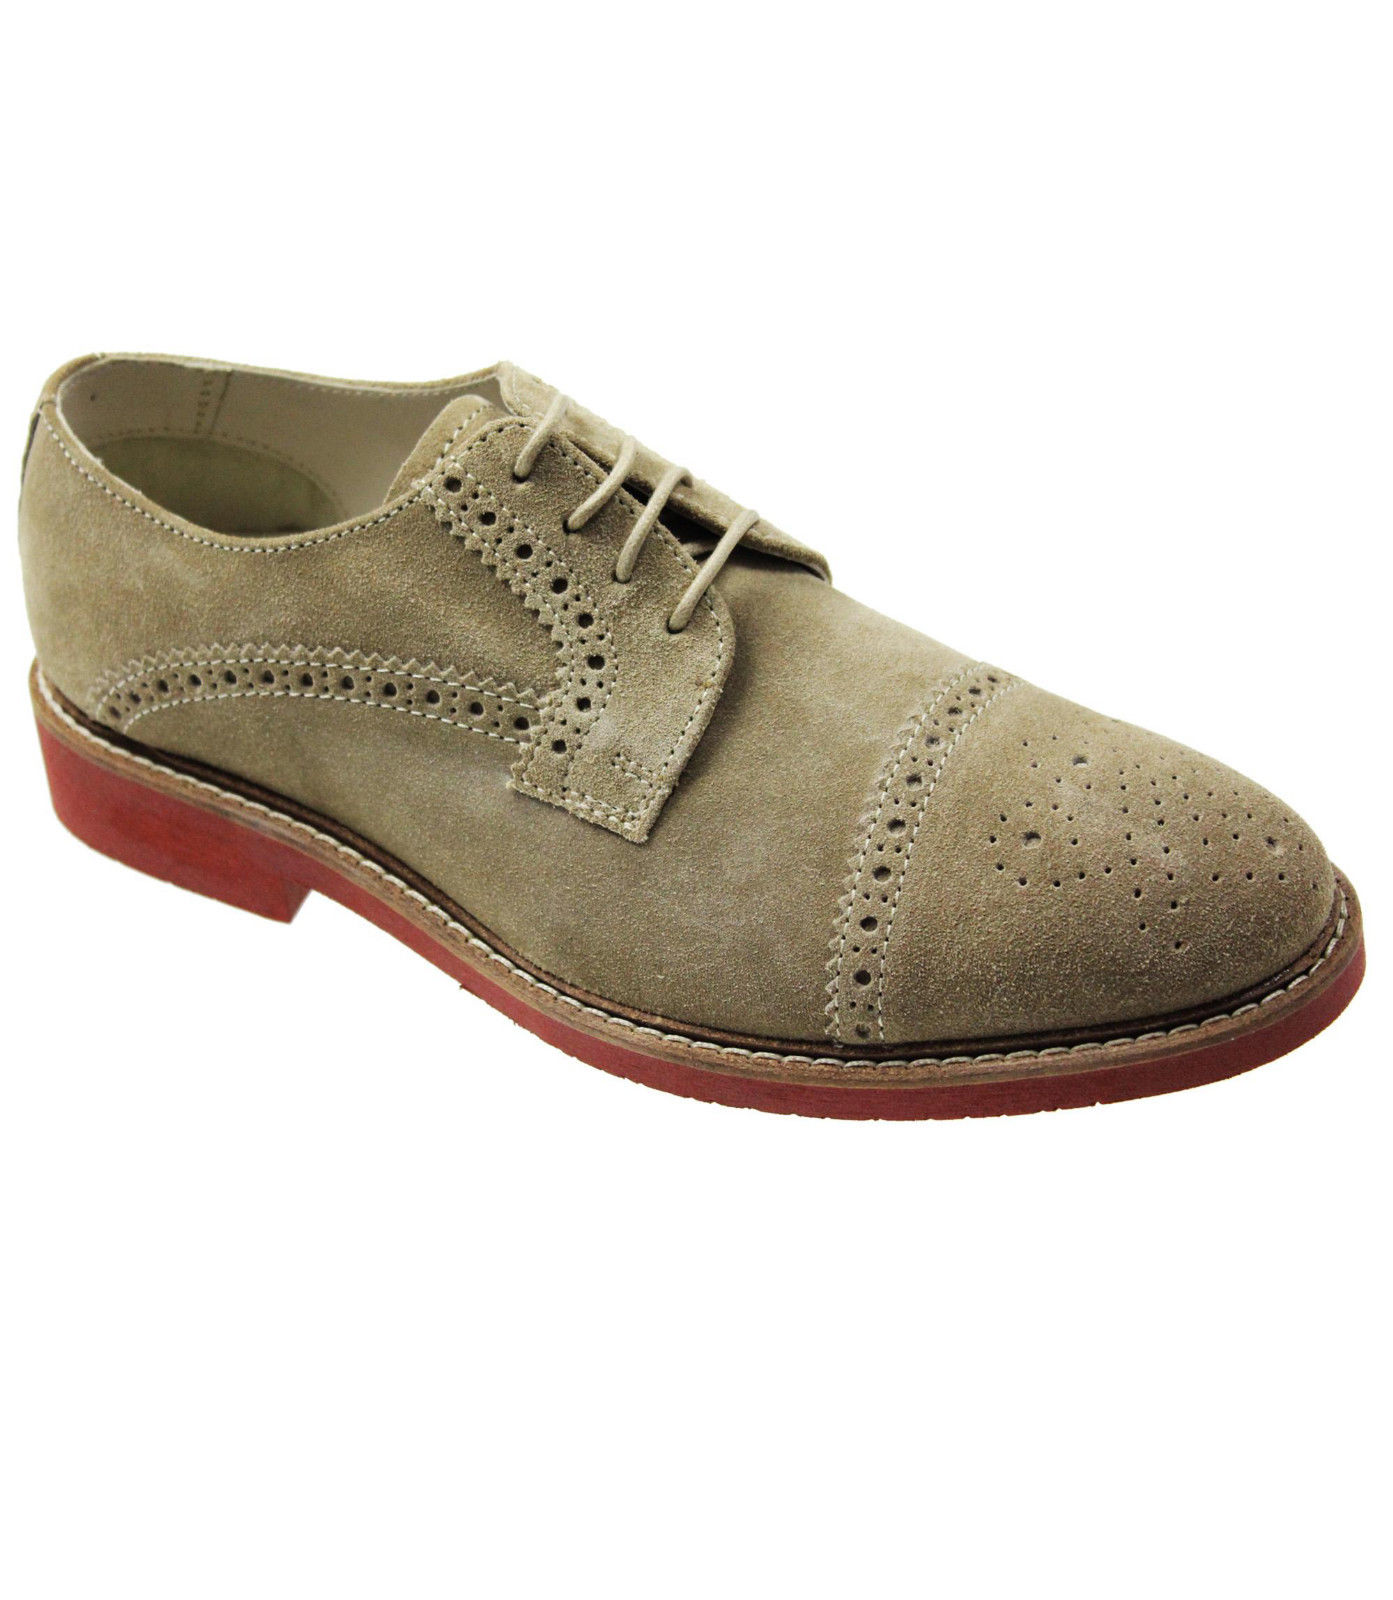 NEW MENS BEIGE SUEDE LEATHER BROGUE OXFORD OFFICE WORK LACE UP SHOES